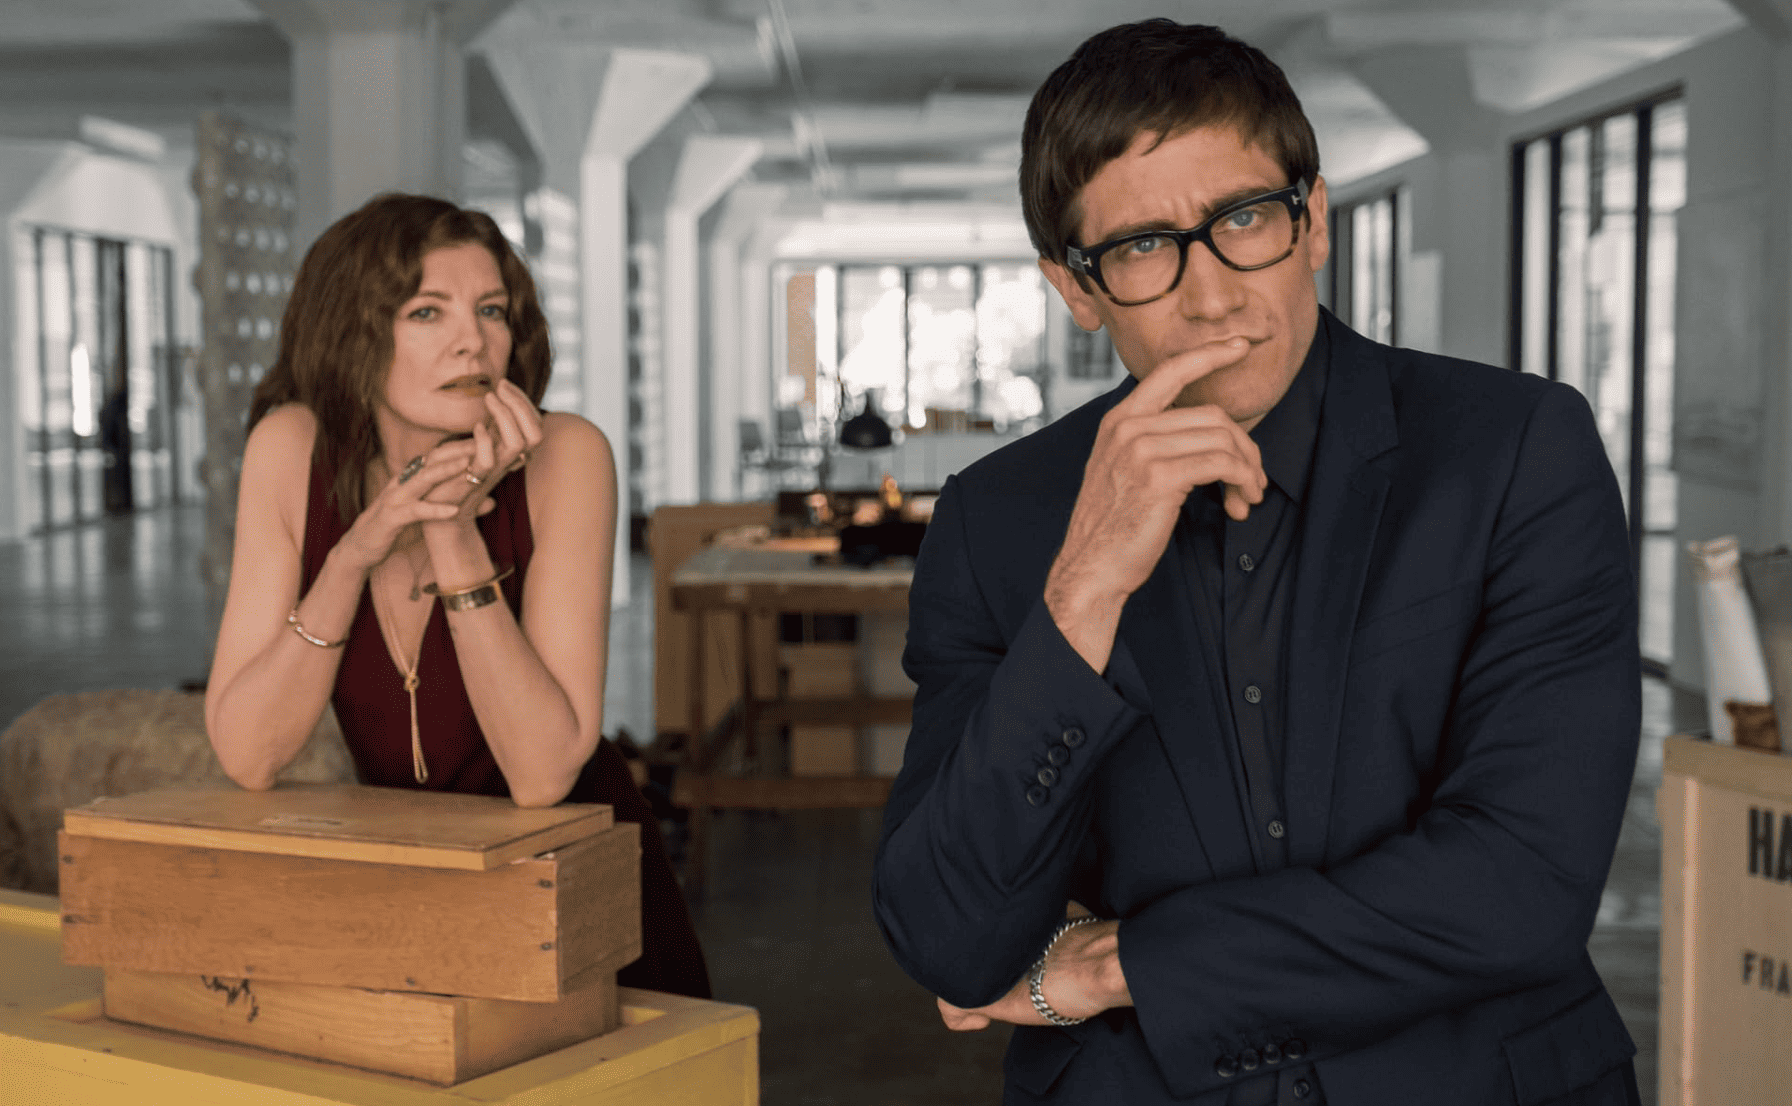 Jake Gyllenhaal as Morf Vandewalt wearing his signature thick glasses in this image from Netflix.